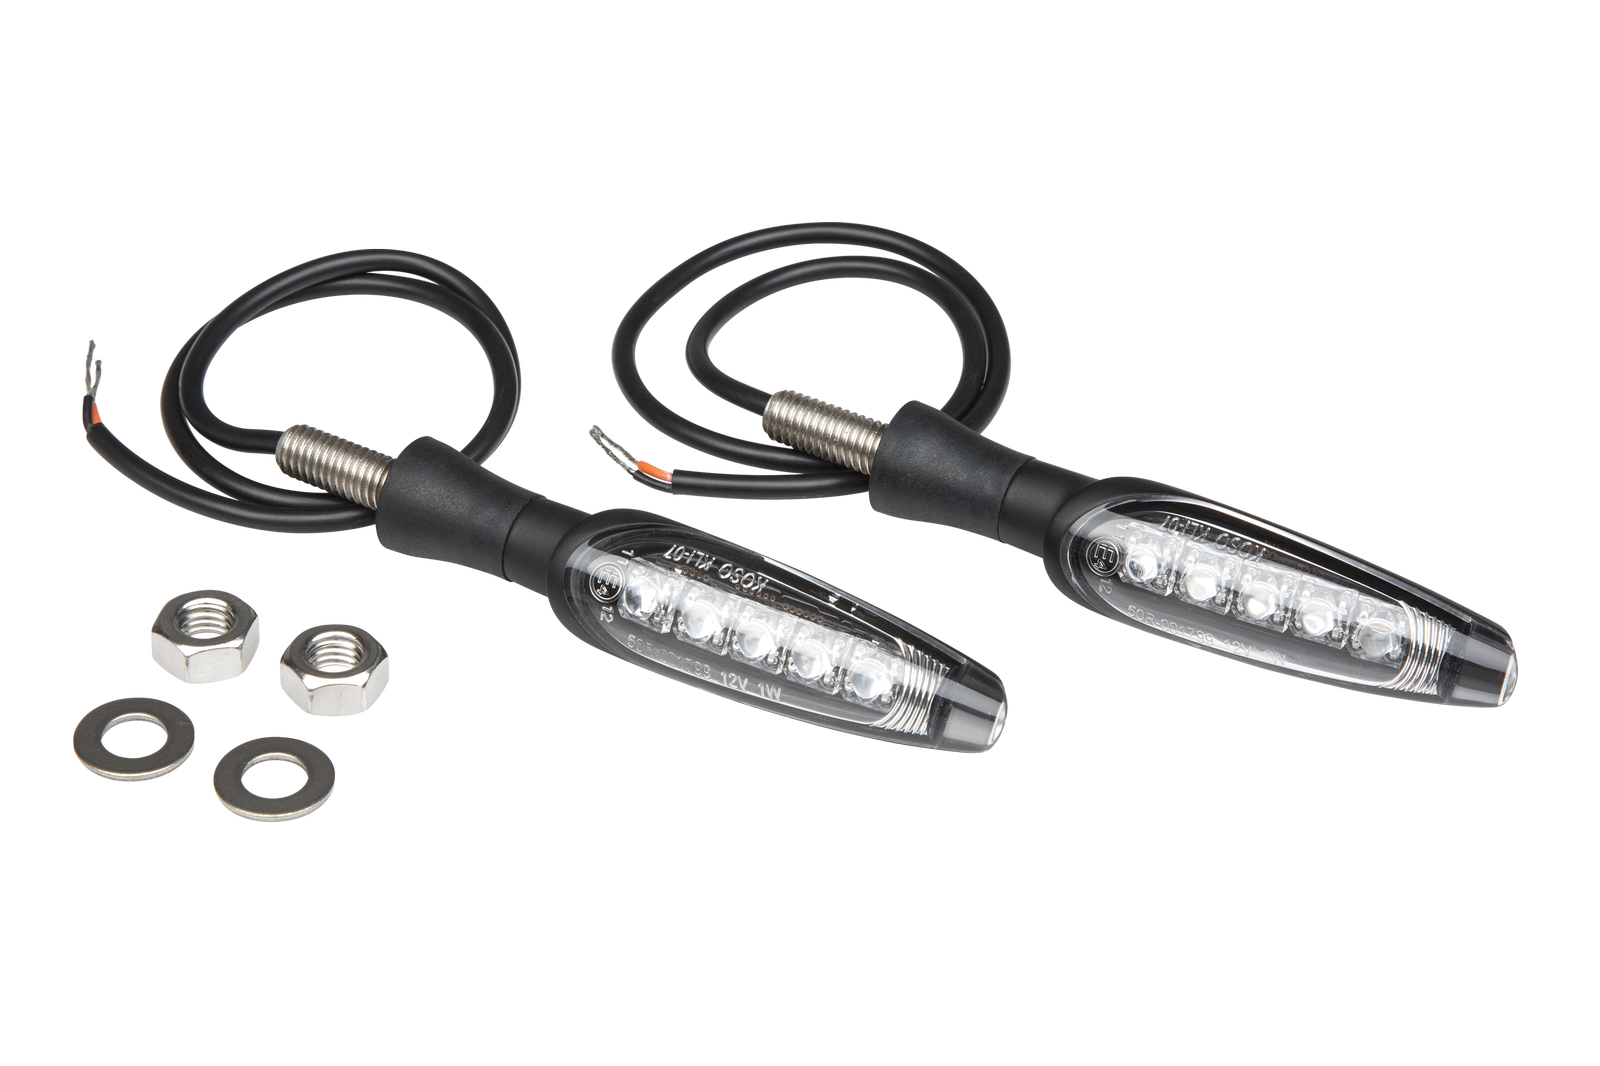 Yoshimra LED turn signals have anodized aluminum bodies, clear lens' and are CE certified